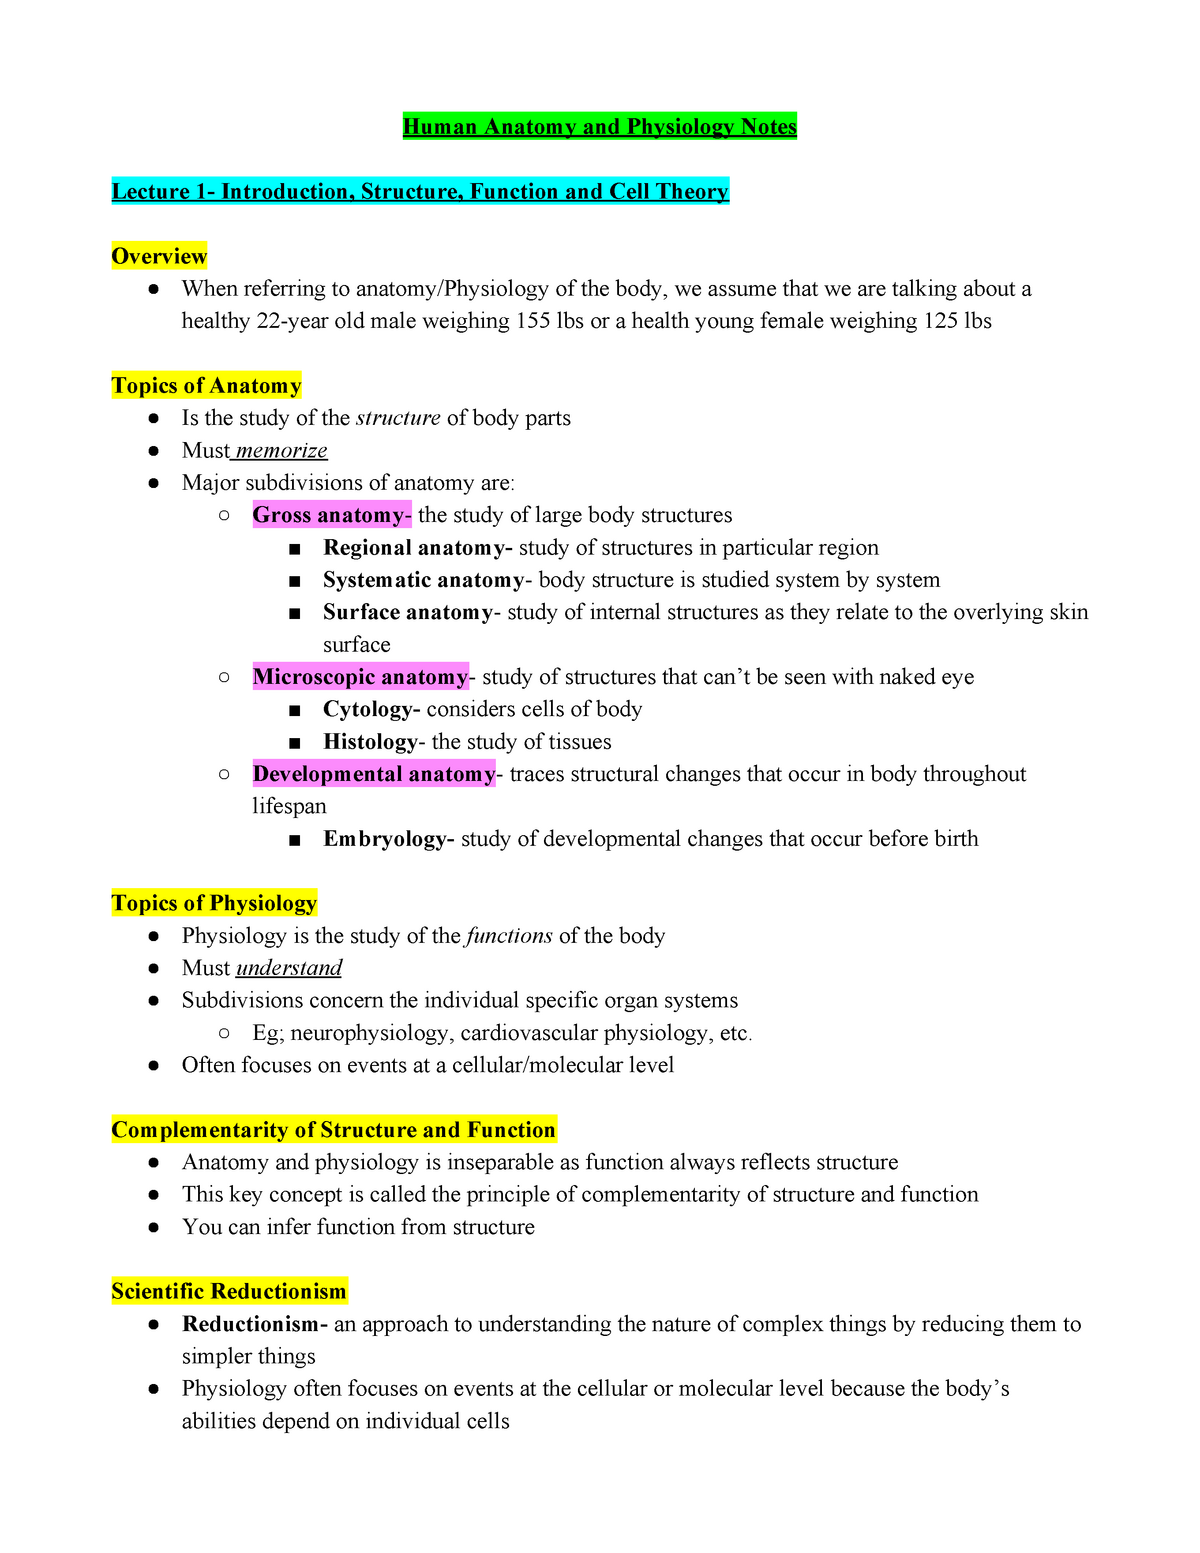 midterm-1-anatomy-and-physiology-notes-human-anatomy-and-physiology